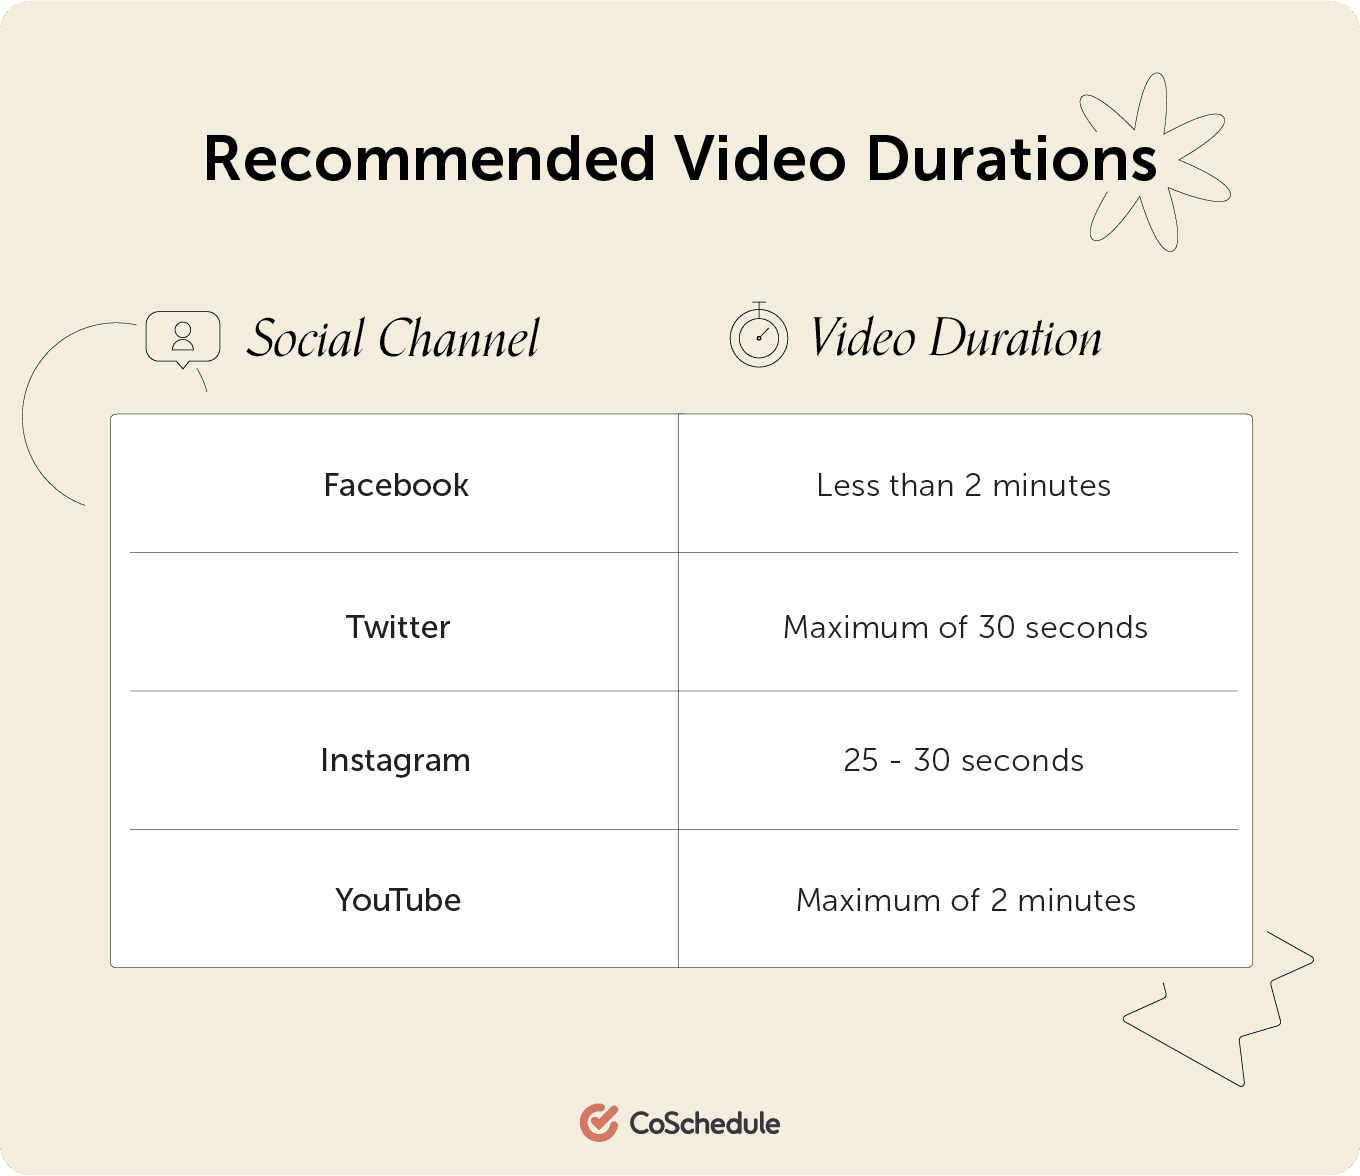 recommended video durations for various social media platforms